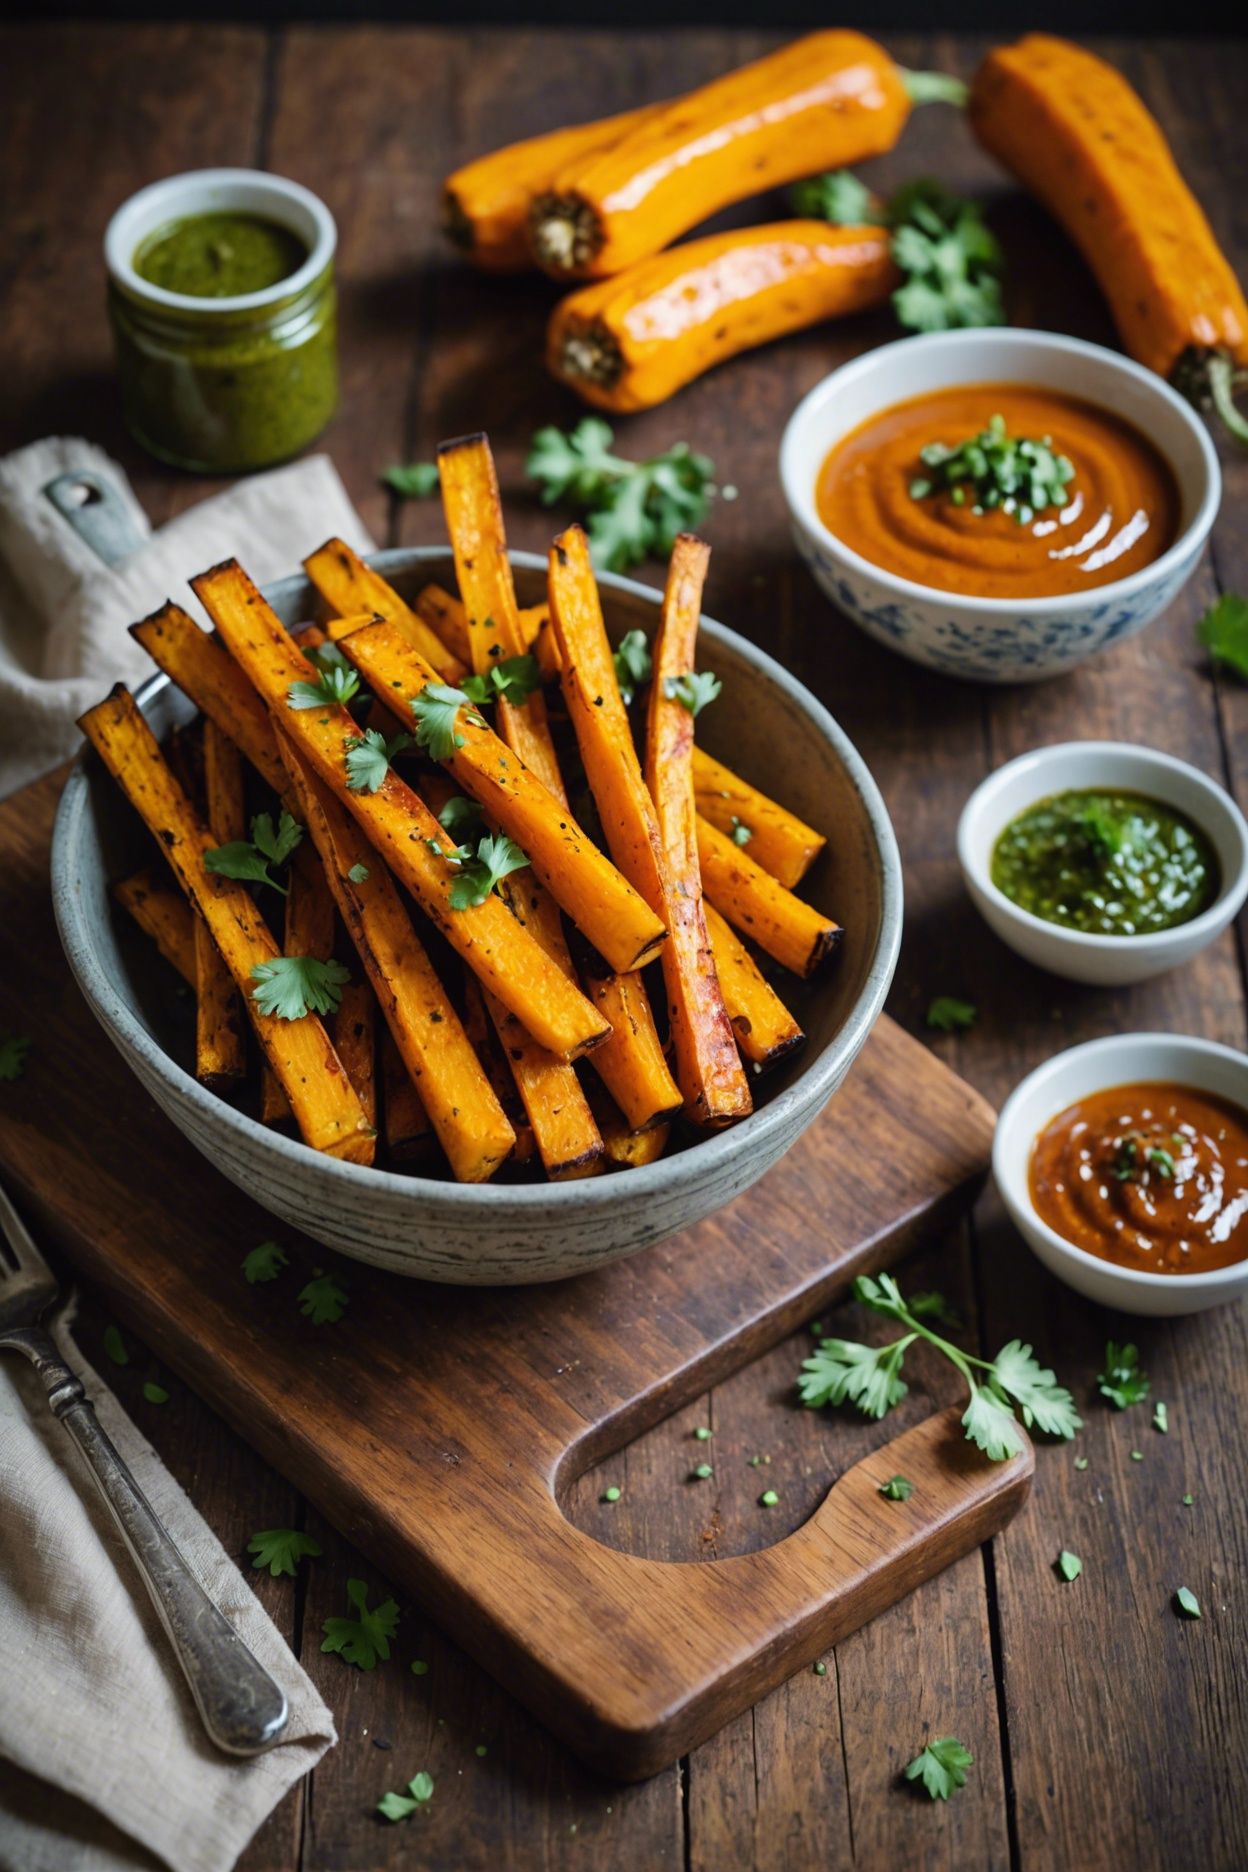 Chinese Five Spice Butternut Squash Fries